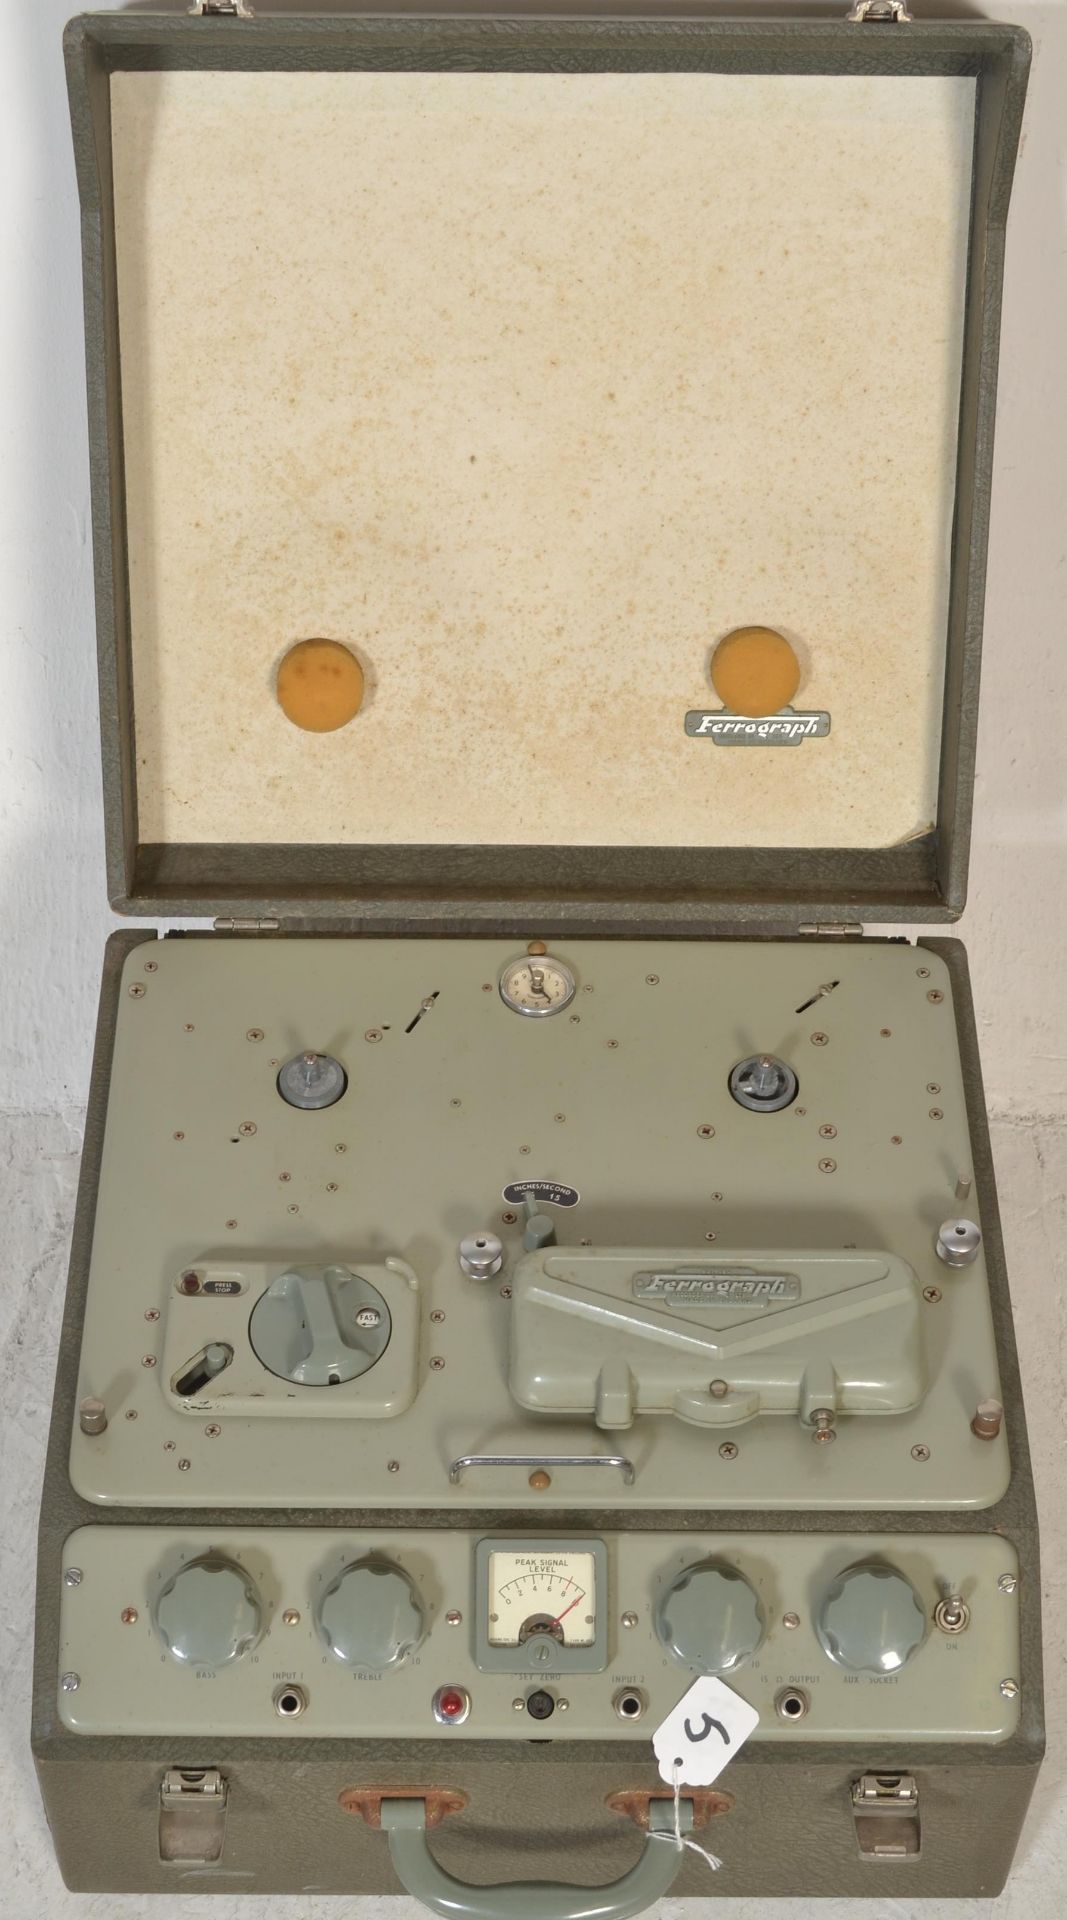 A vintage 20th Century Ferrograph type 5A serial no 5/30170 reel to reel tape recorder, vinyl